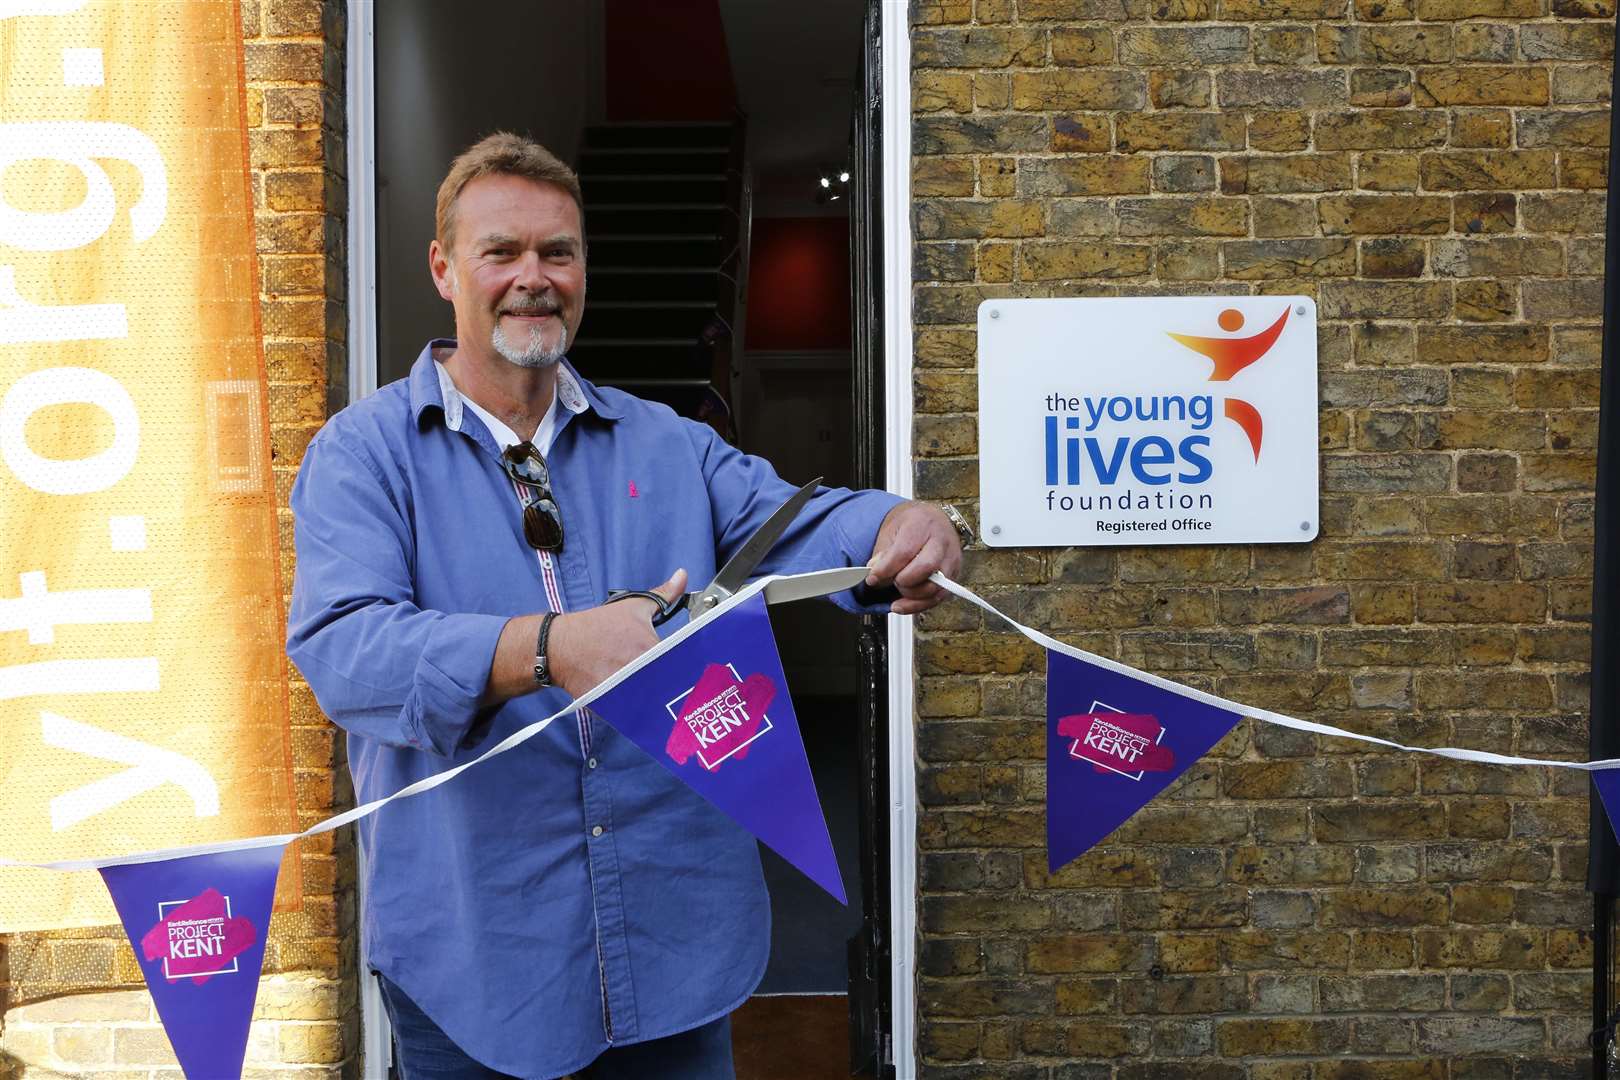 Project Kent's Grand Opening! kmfm's Project Kent with Kent Reliance. Andy Golding from Kent Relliance cuts the ribbon at Young Lives Foundation .Picture: Andy Jones (4165019)